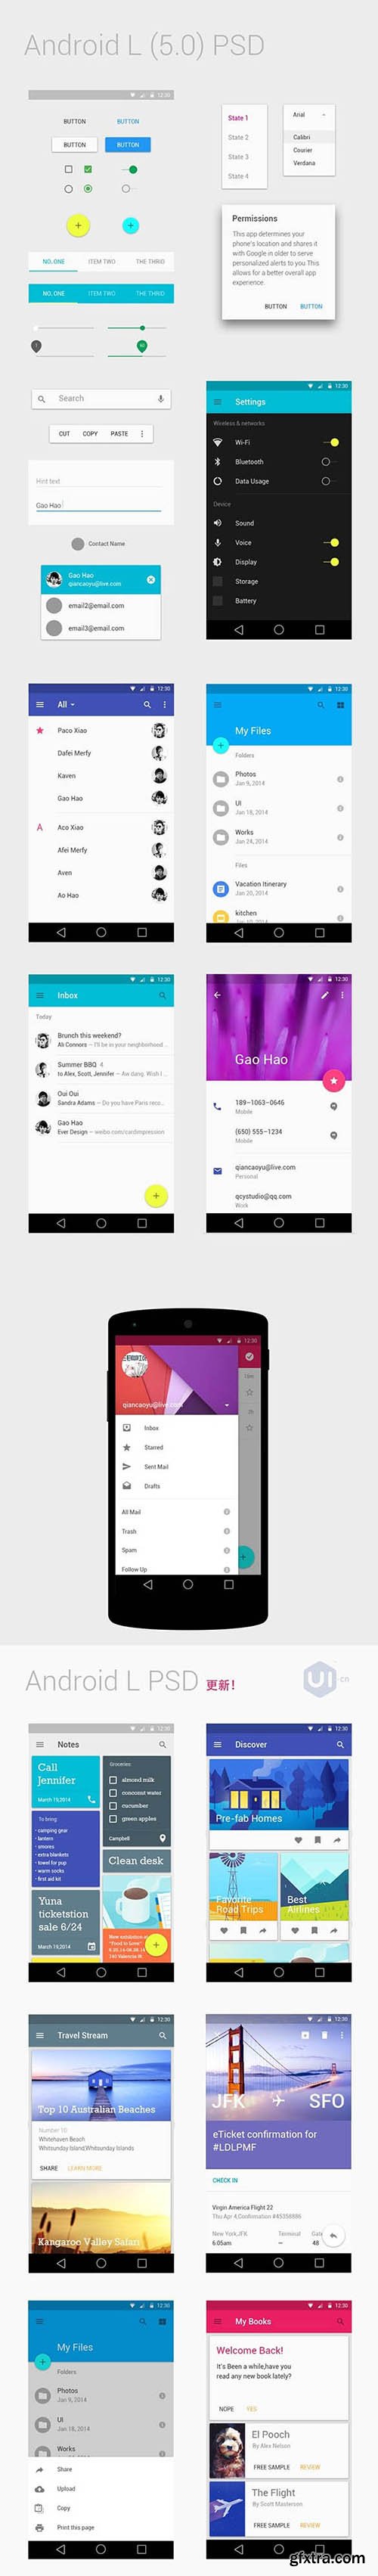 PSD Web Design - Android 5.0/Material Design